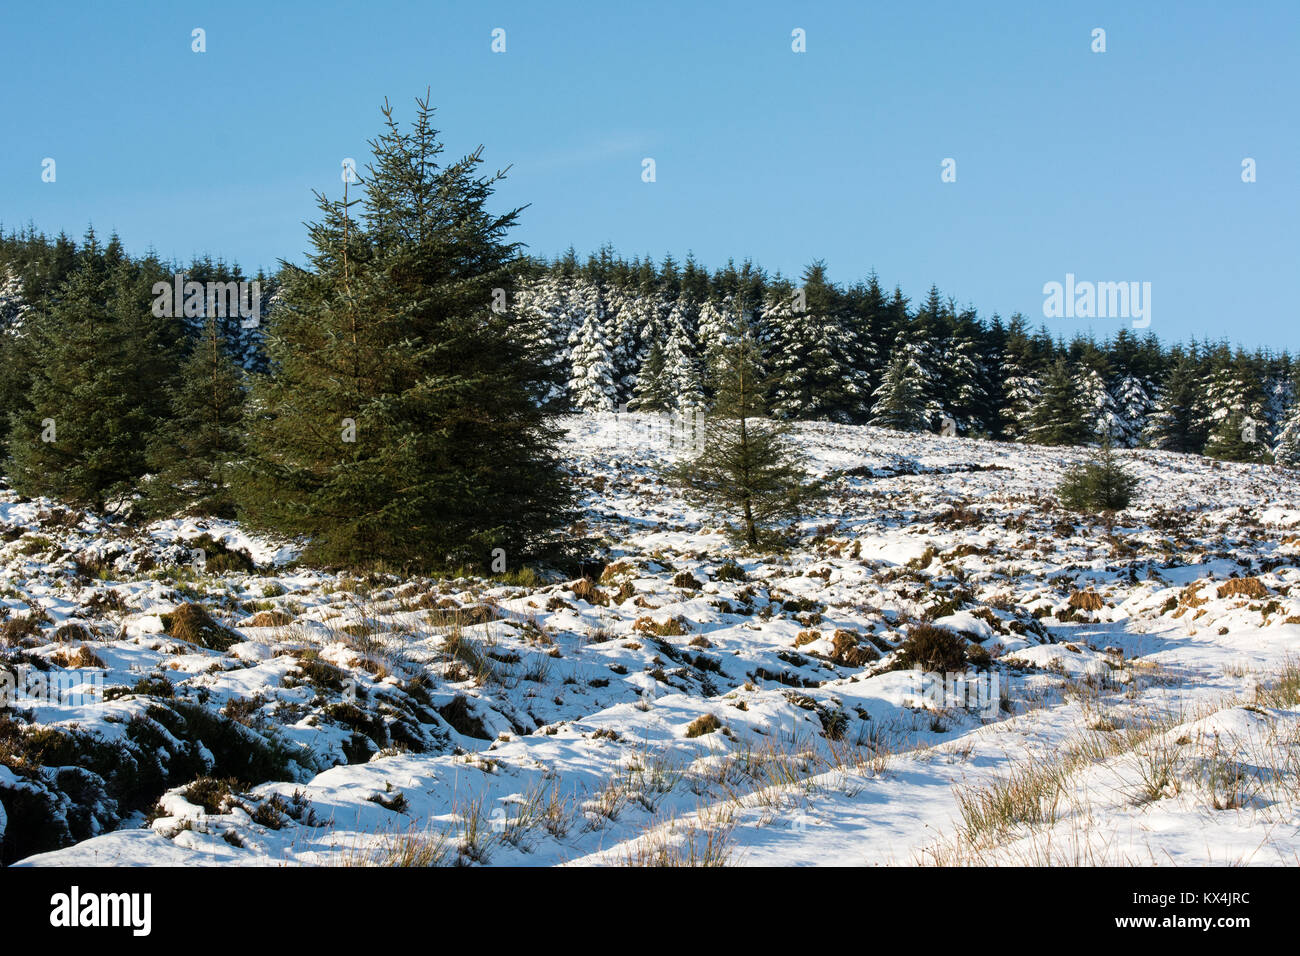 Snow and Pines Trees in Wicklow uplands in Ireland Stock Photo